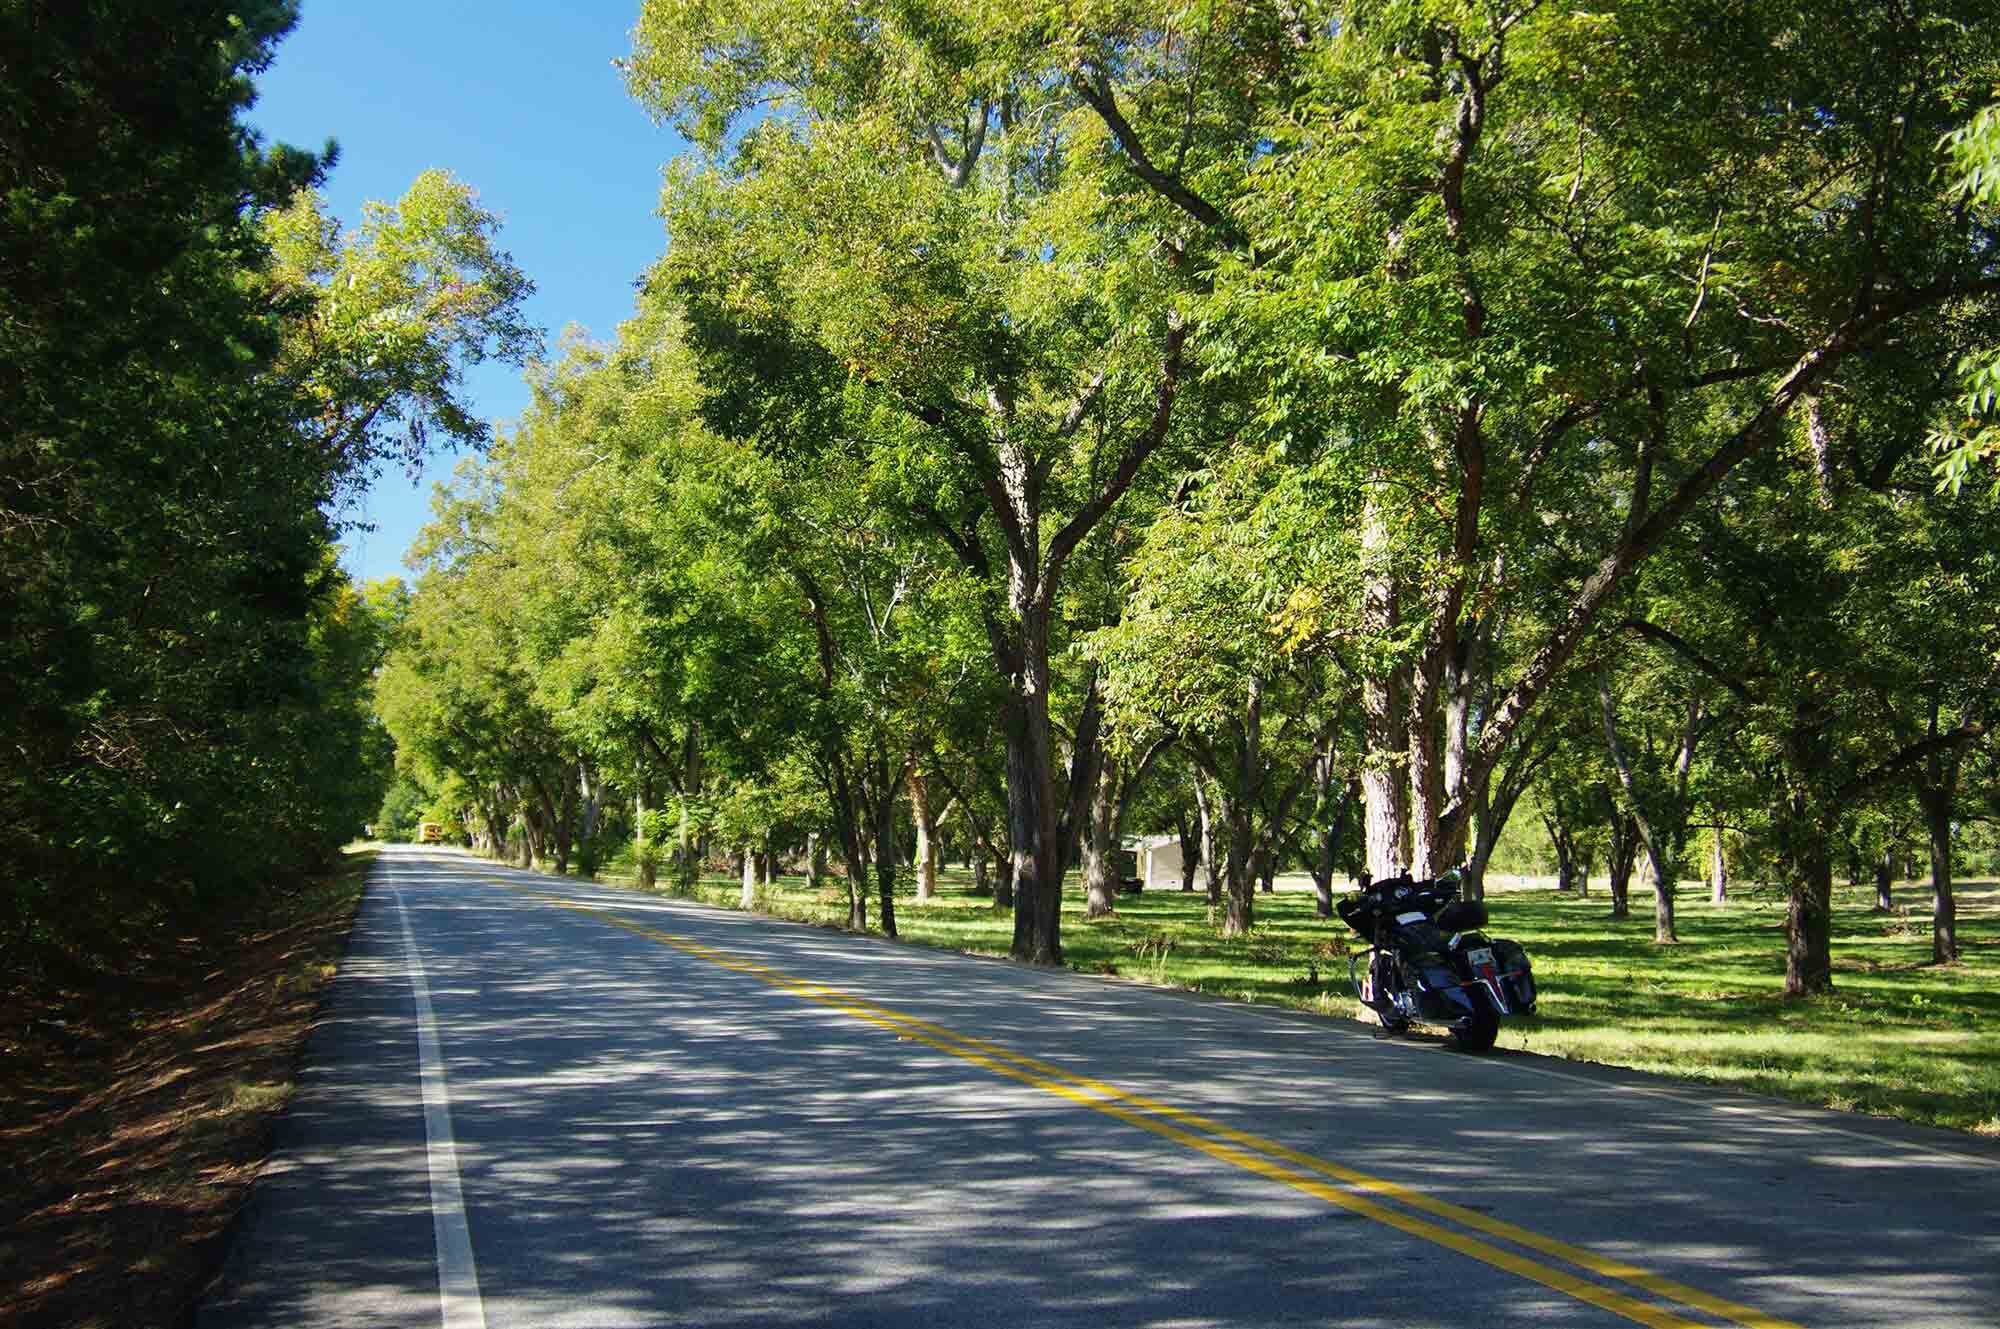 A magnificent stretch of perfectly paved pecan-tree-lined highway.